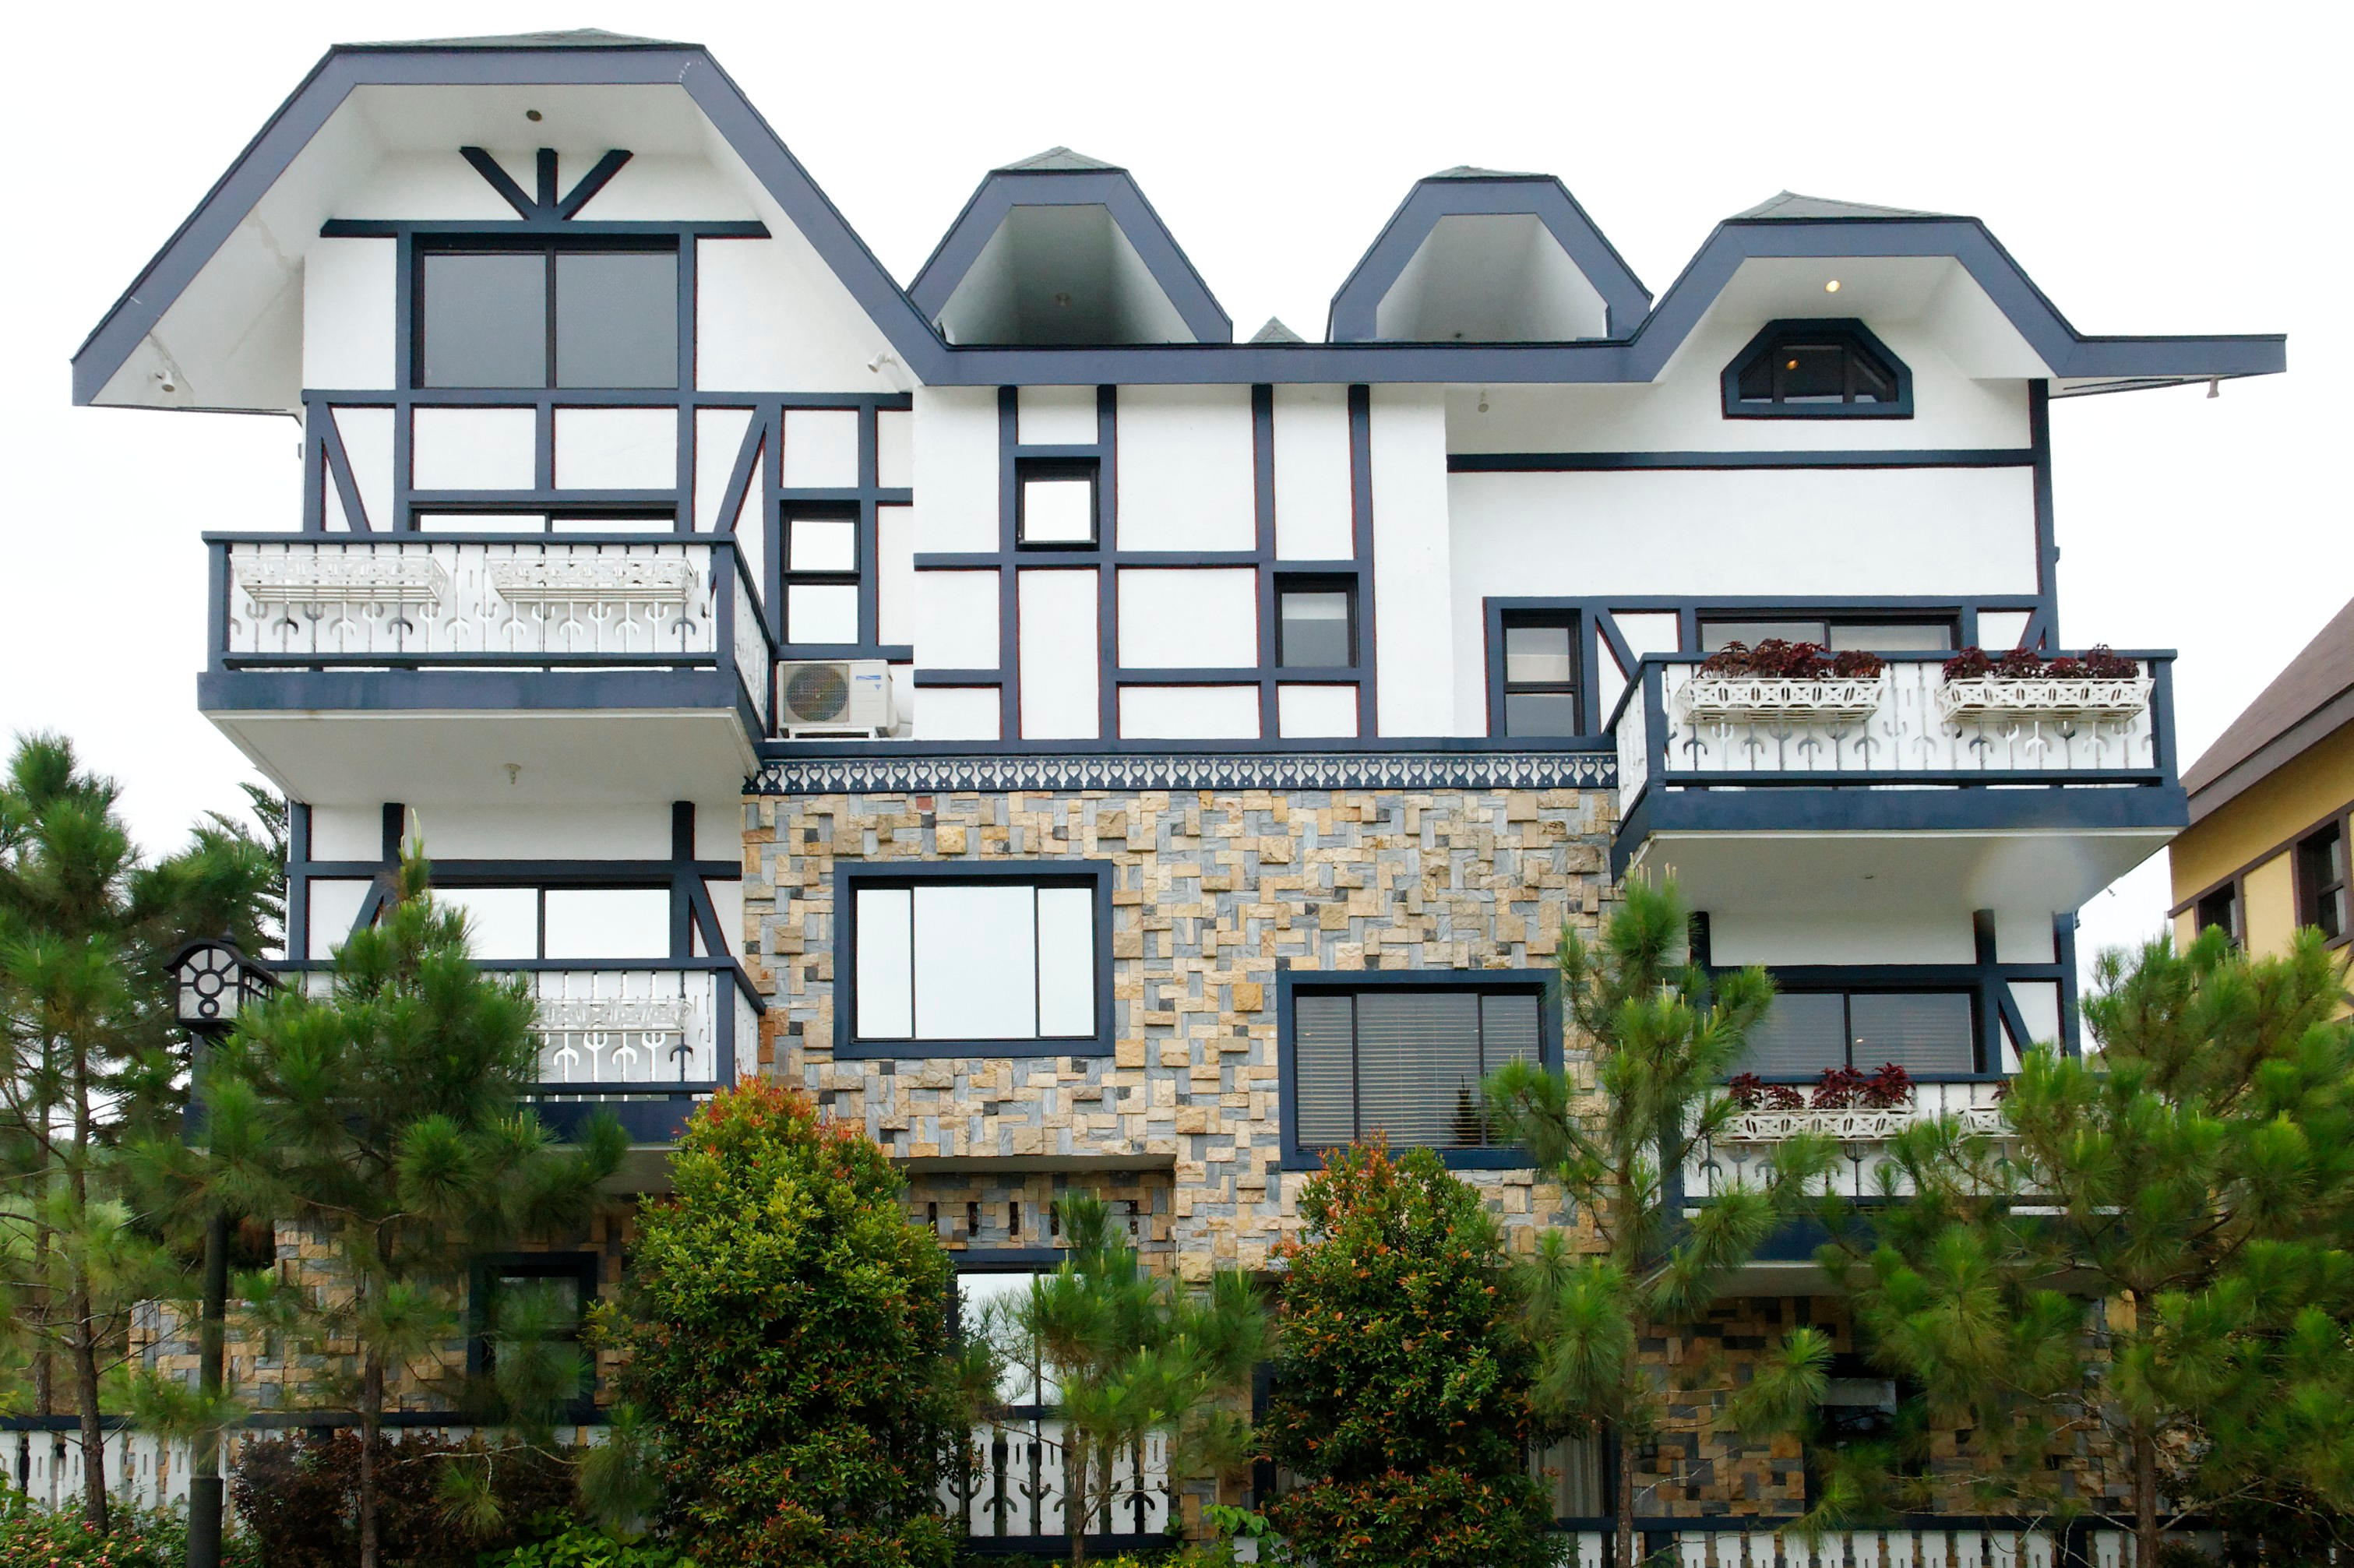 Brittany Corporation's Crosswinds Tagaytay is a themed community that is inspired by the Swiss lifestyle